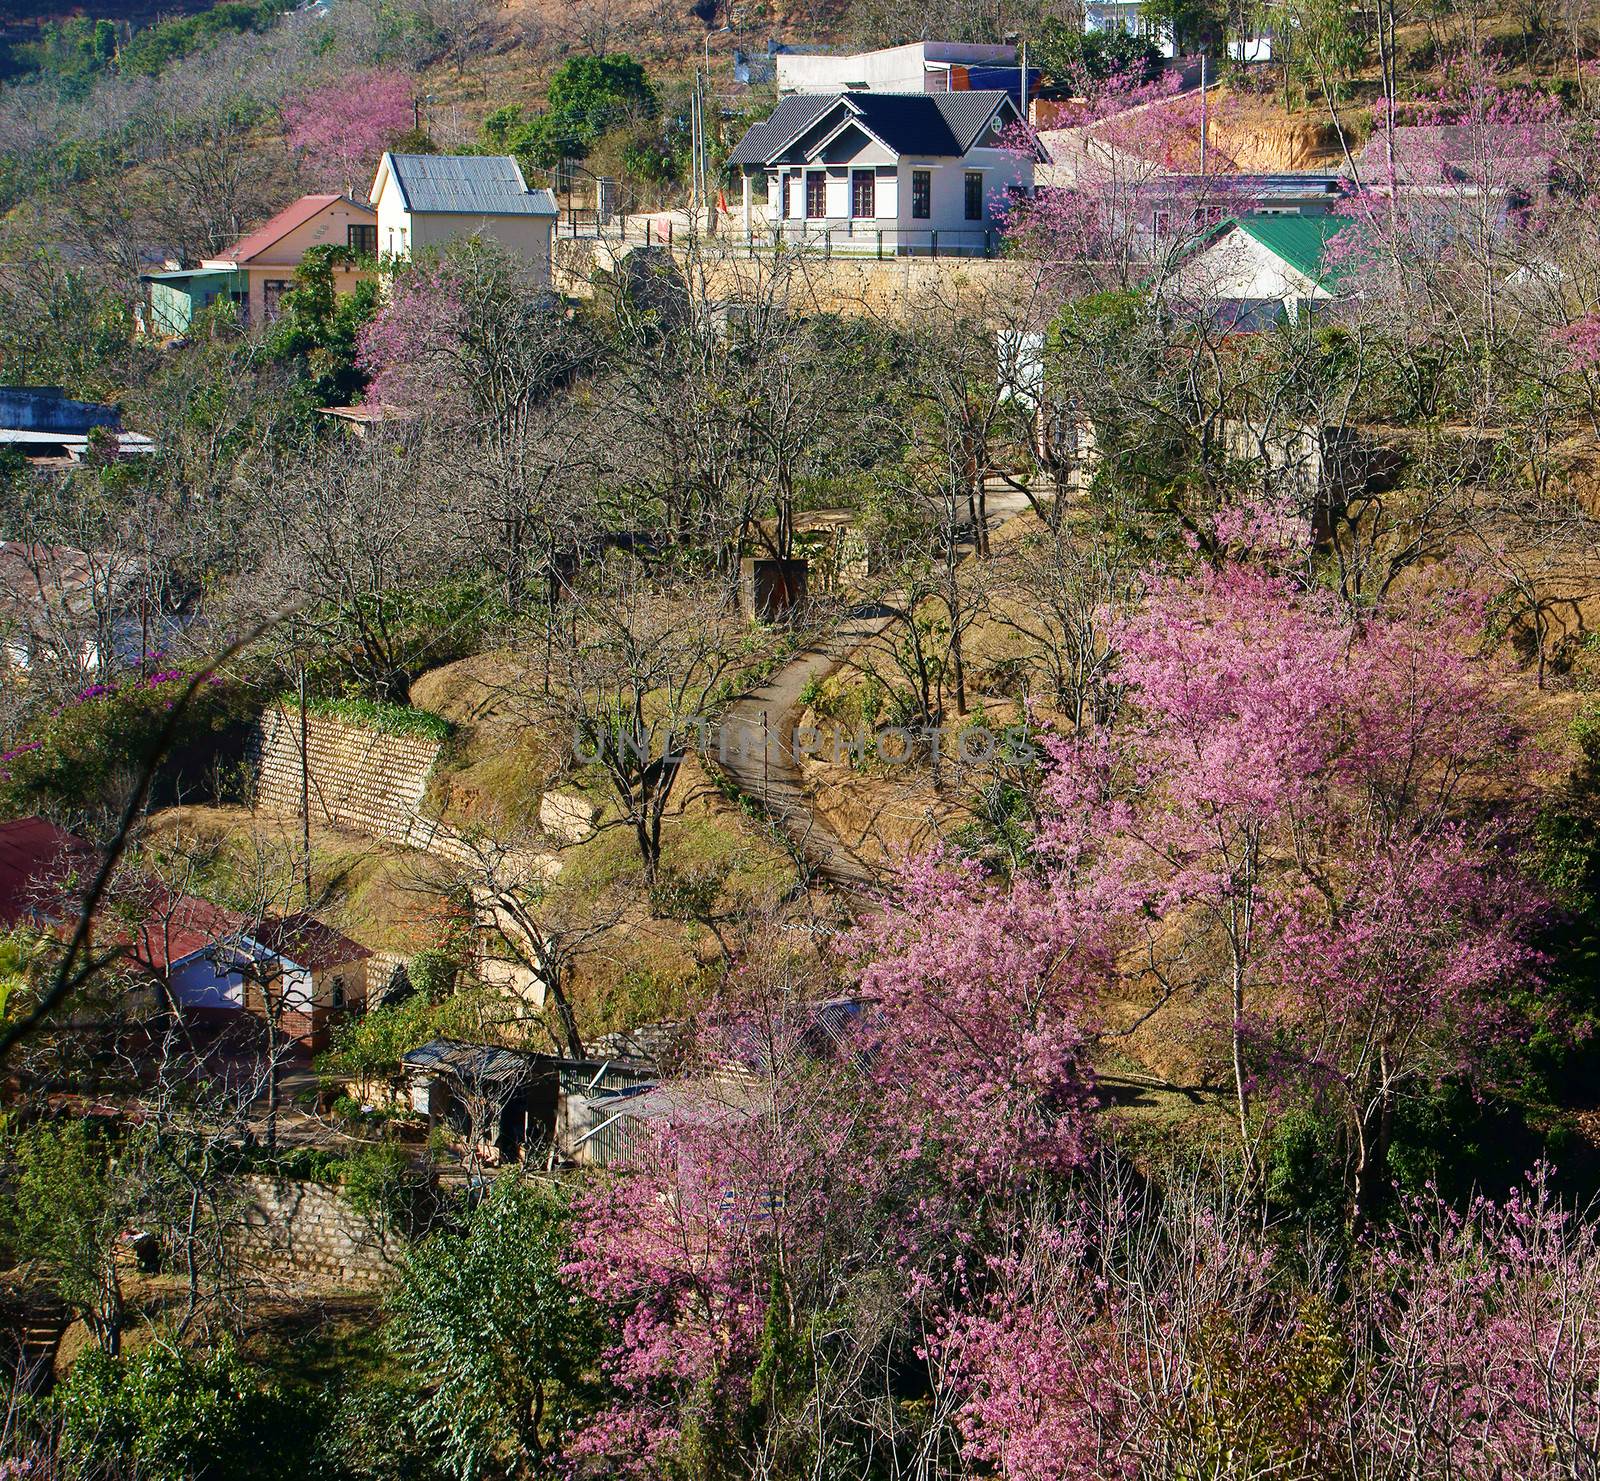 Cherry blossom blow colourful at valley of Dalat's suburb in spr by xuanhuongho